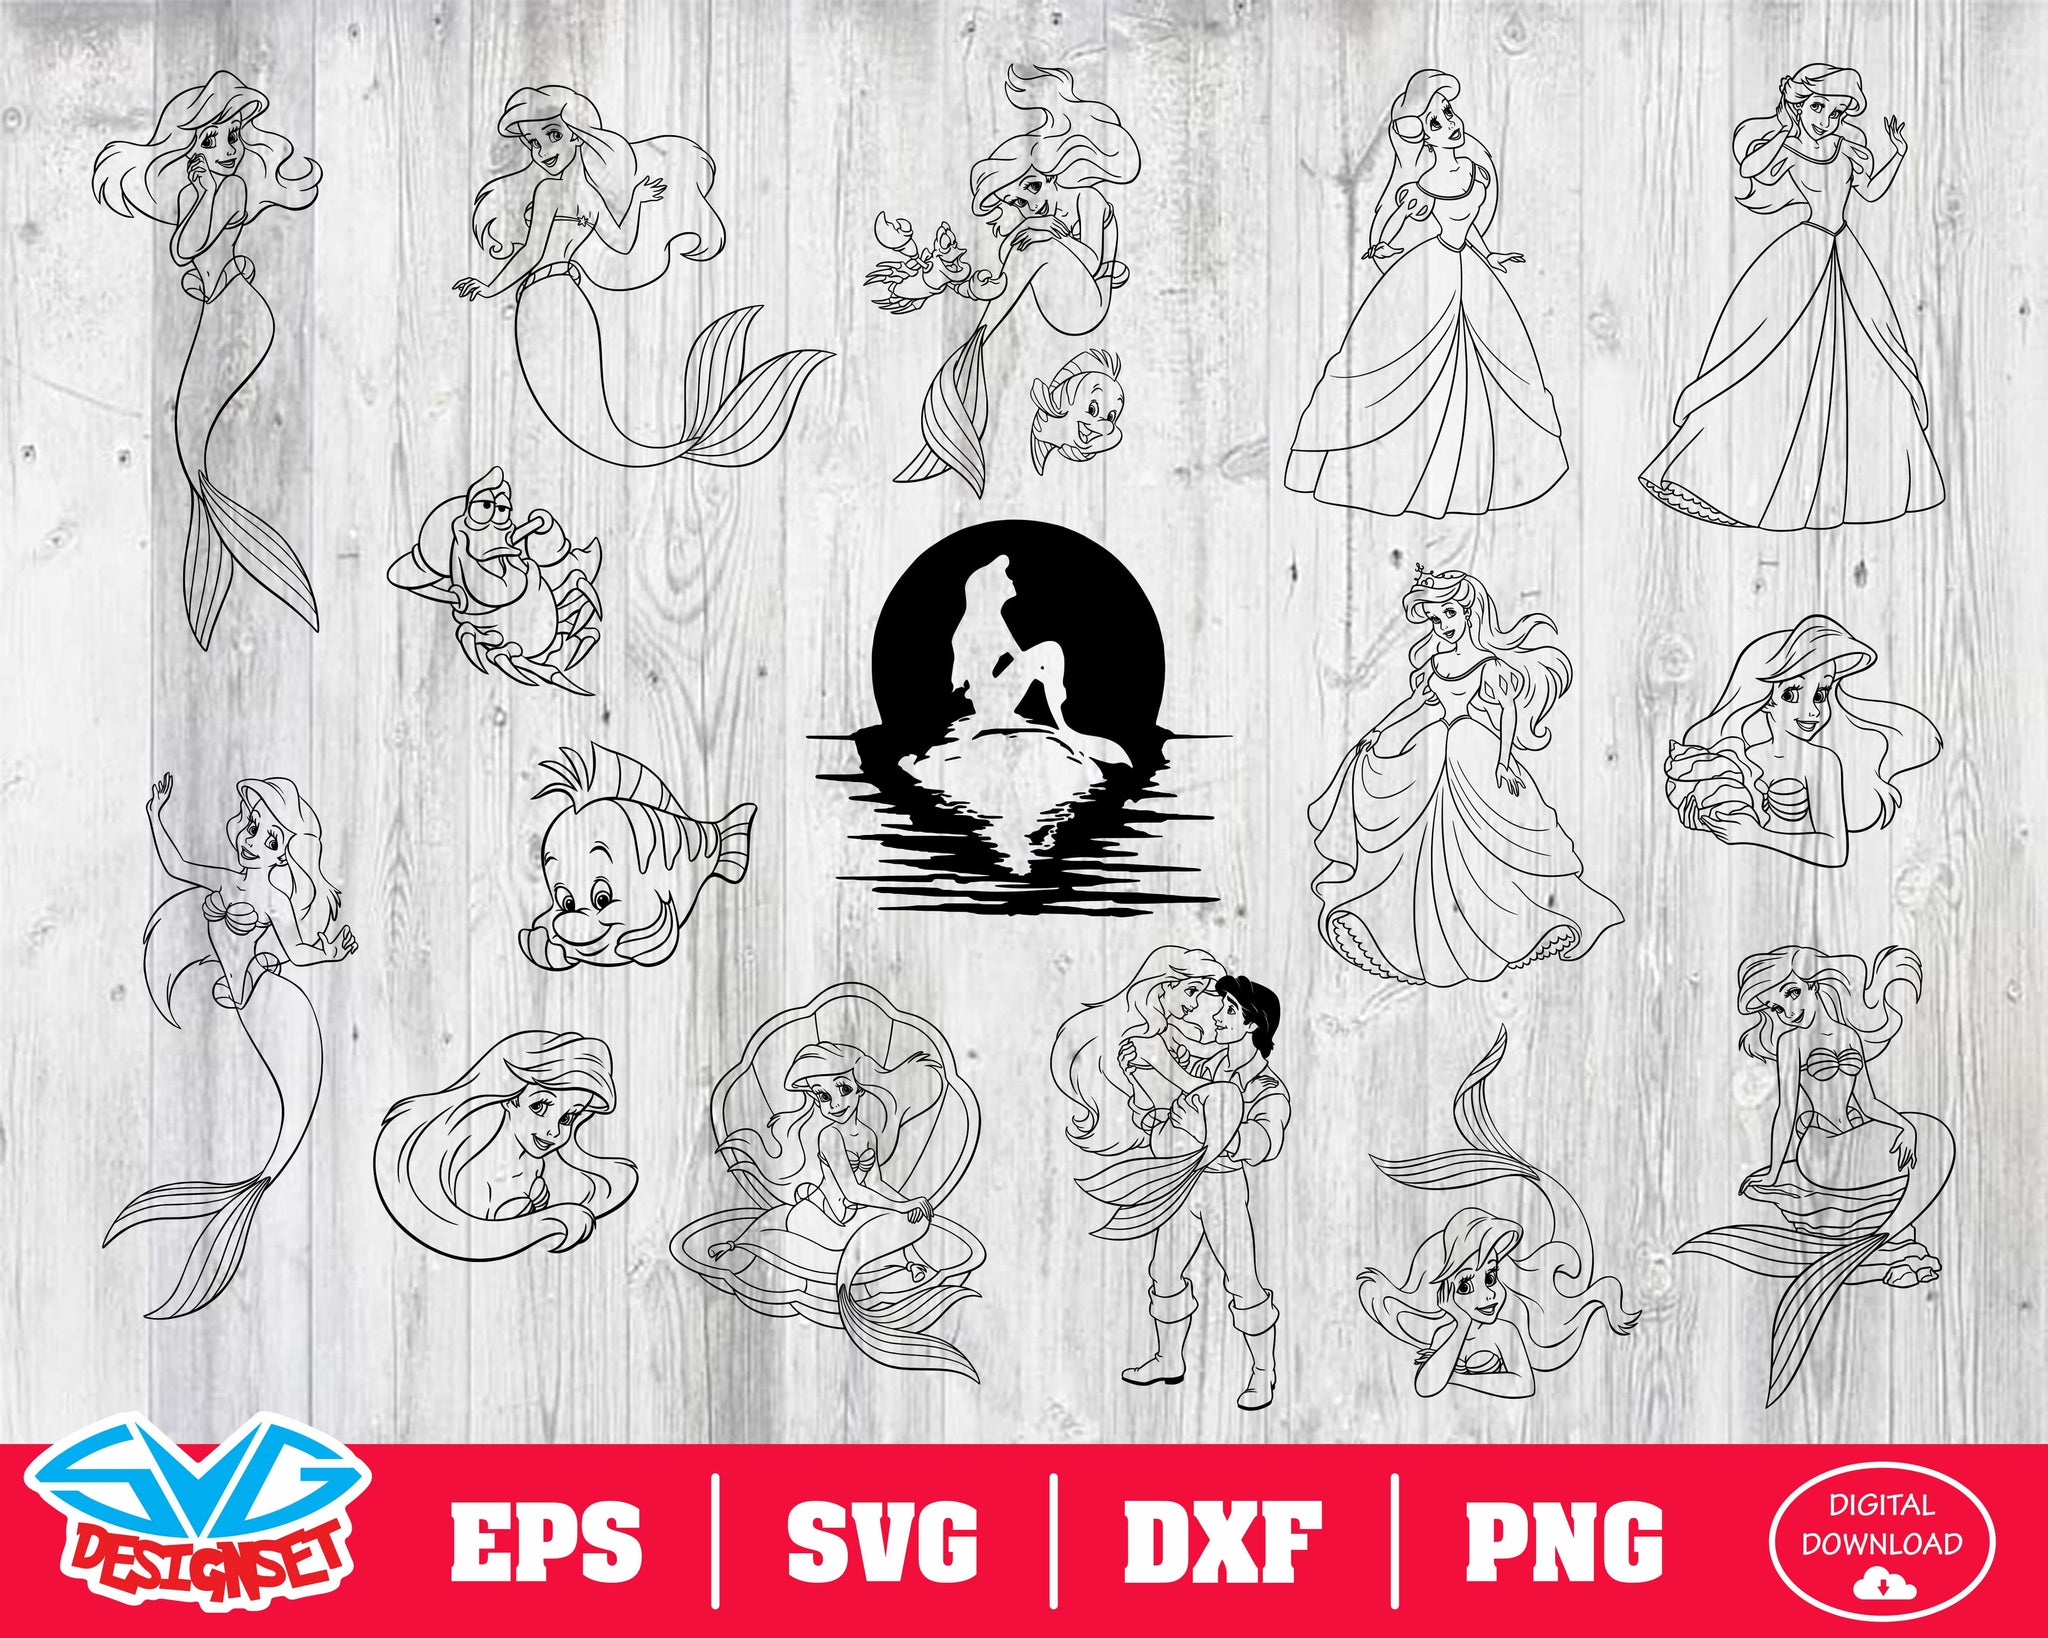 Download The Little Mermaid Svg Dxf Eps Png Clipart Silhouette And Cutfile